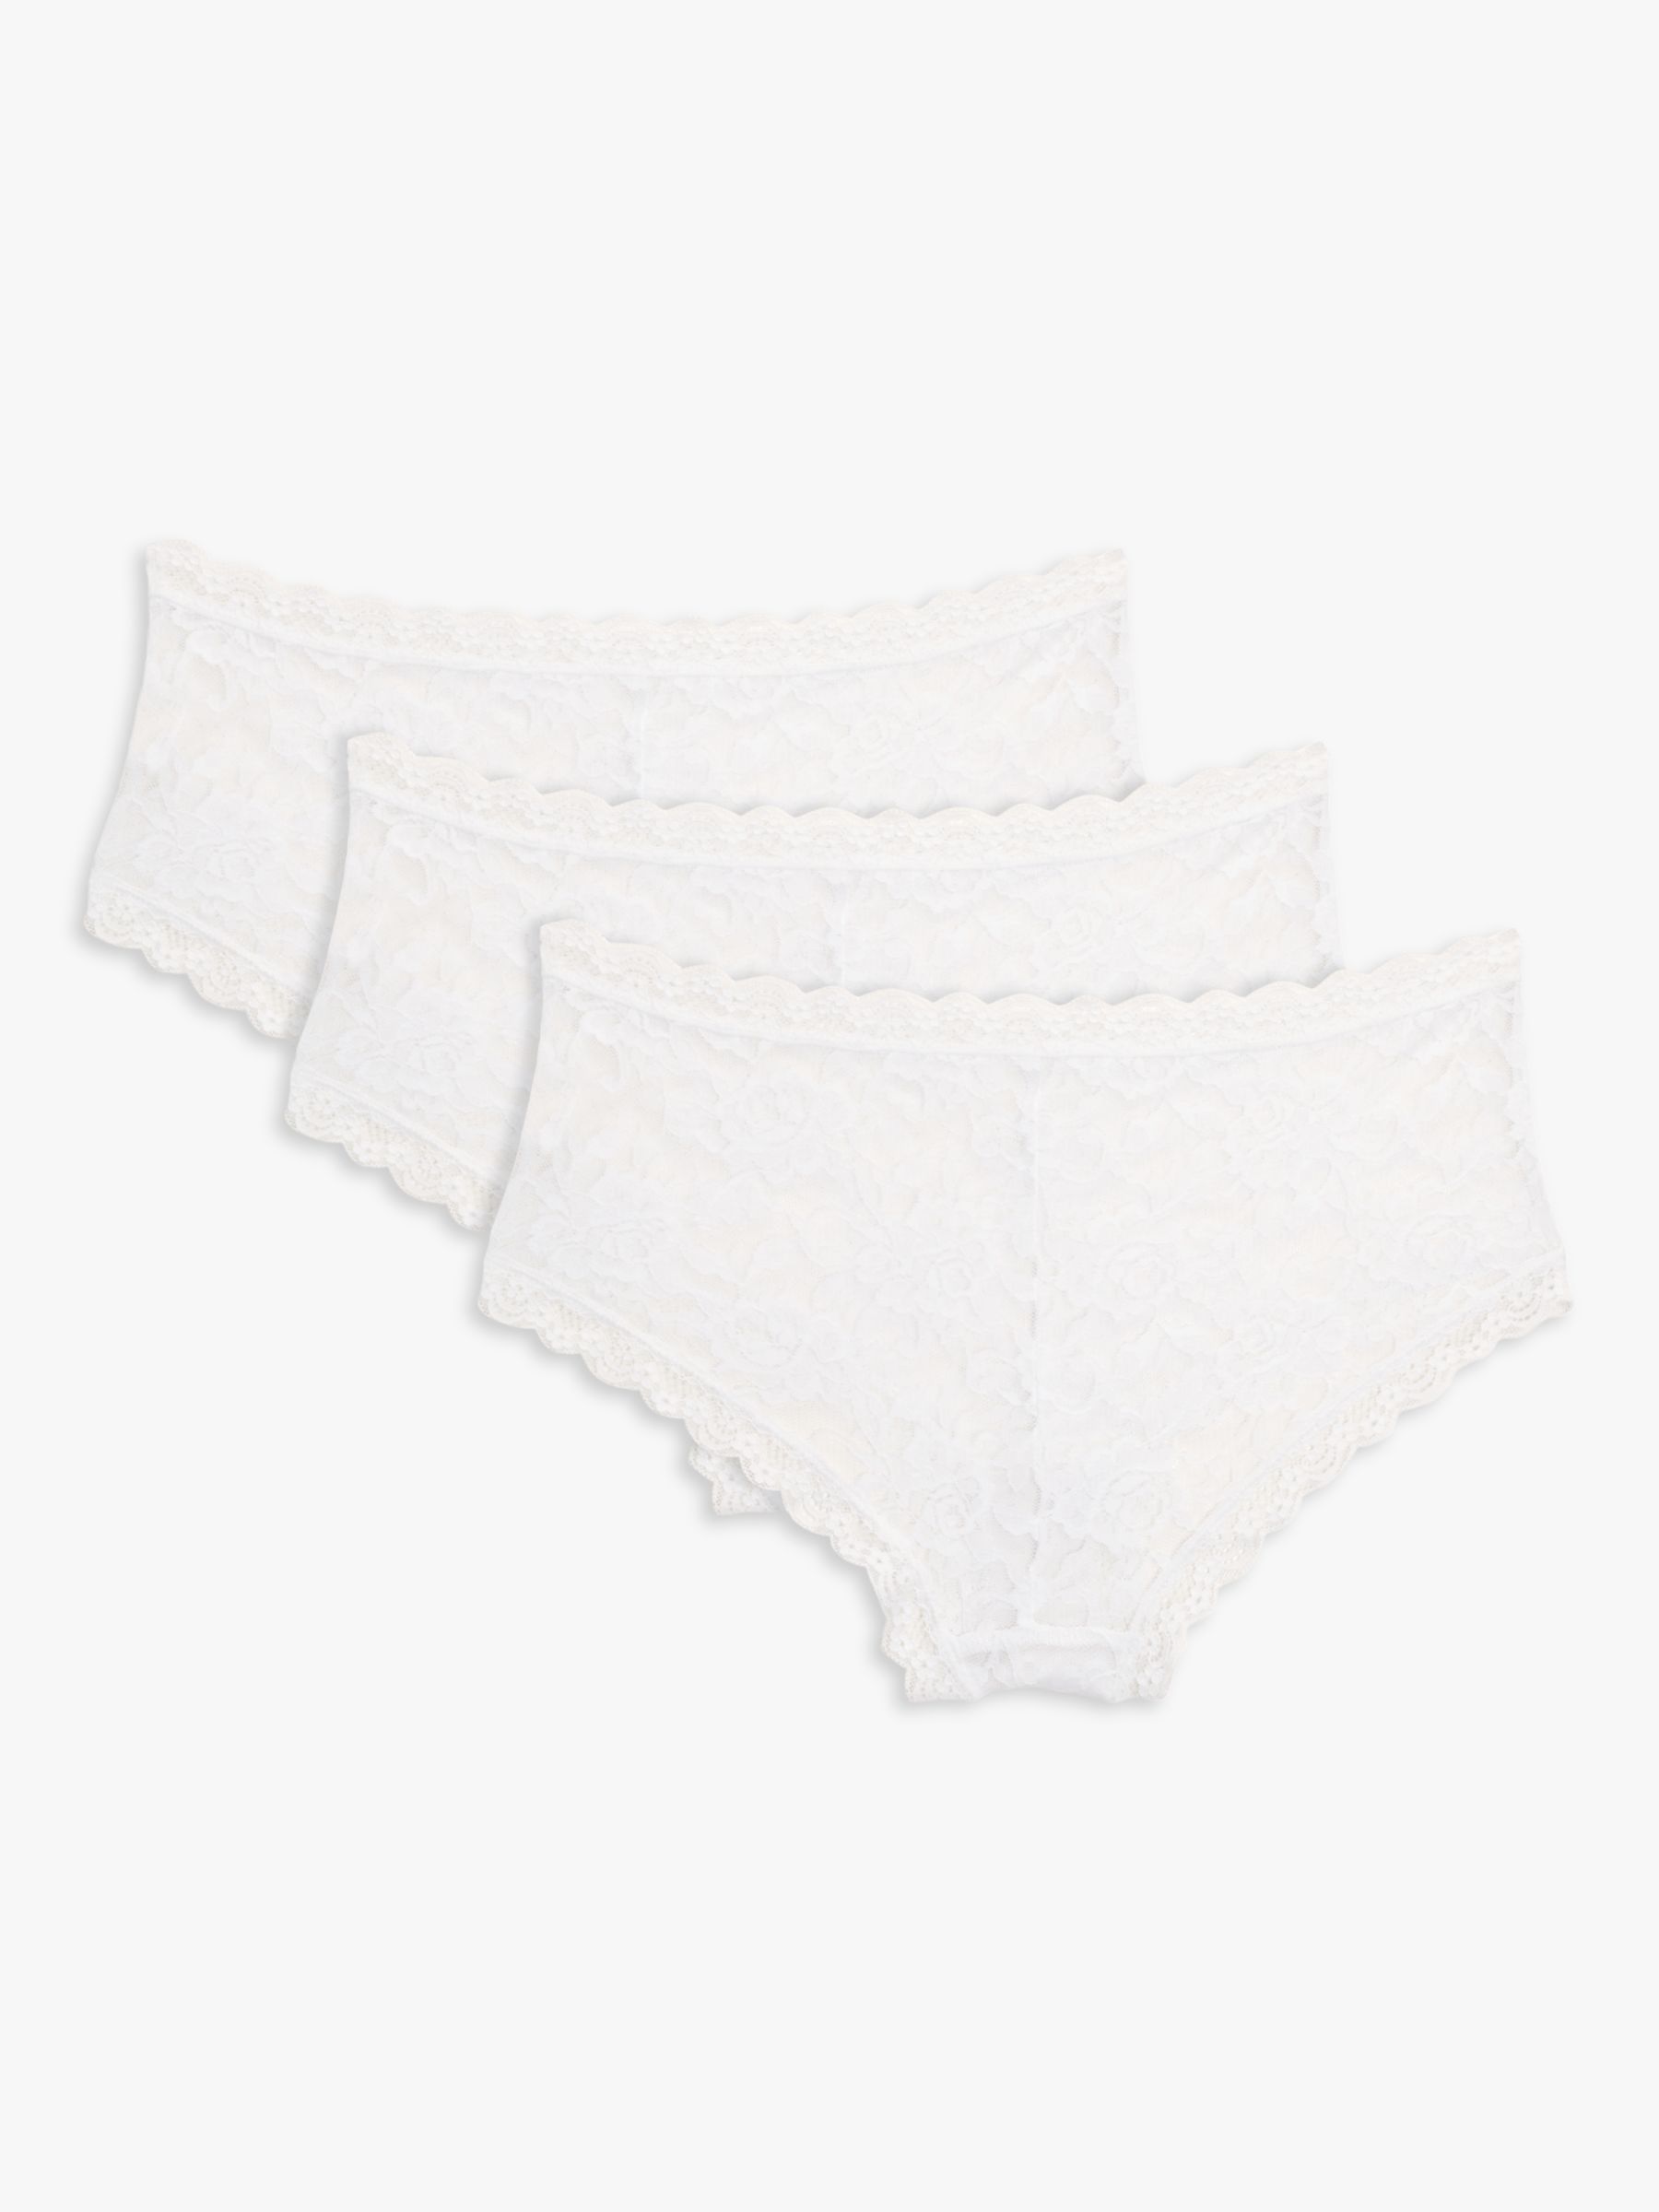 Buy John Lewis ANYDAY Helenca Lace Short Knickers, Pack of 3 Online at johnlewis.com